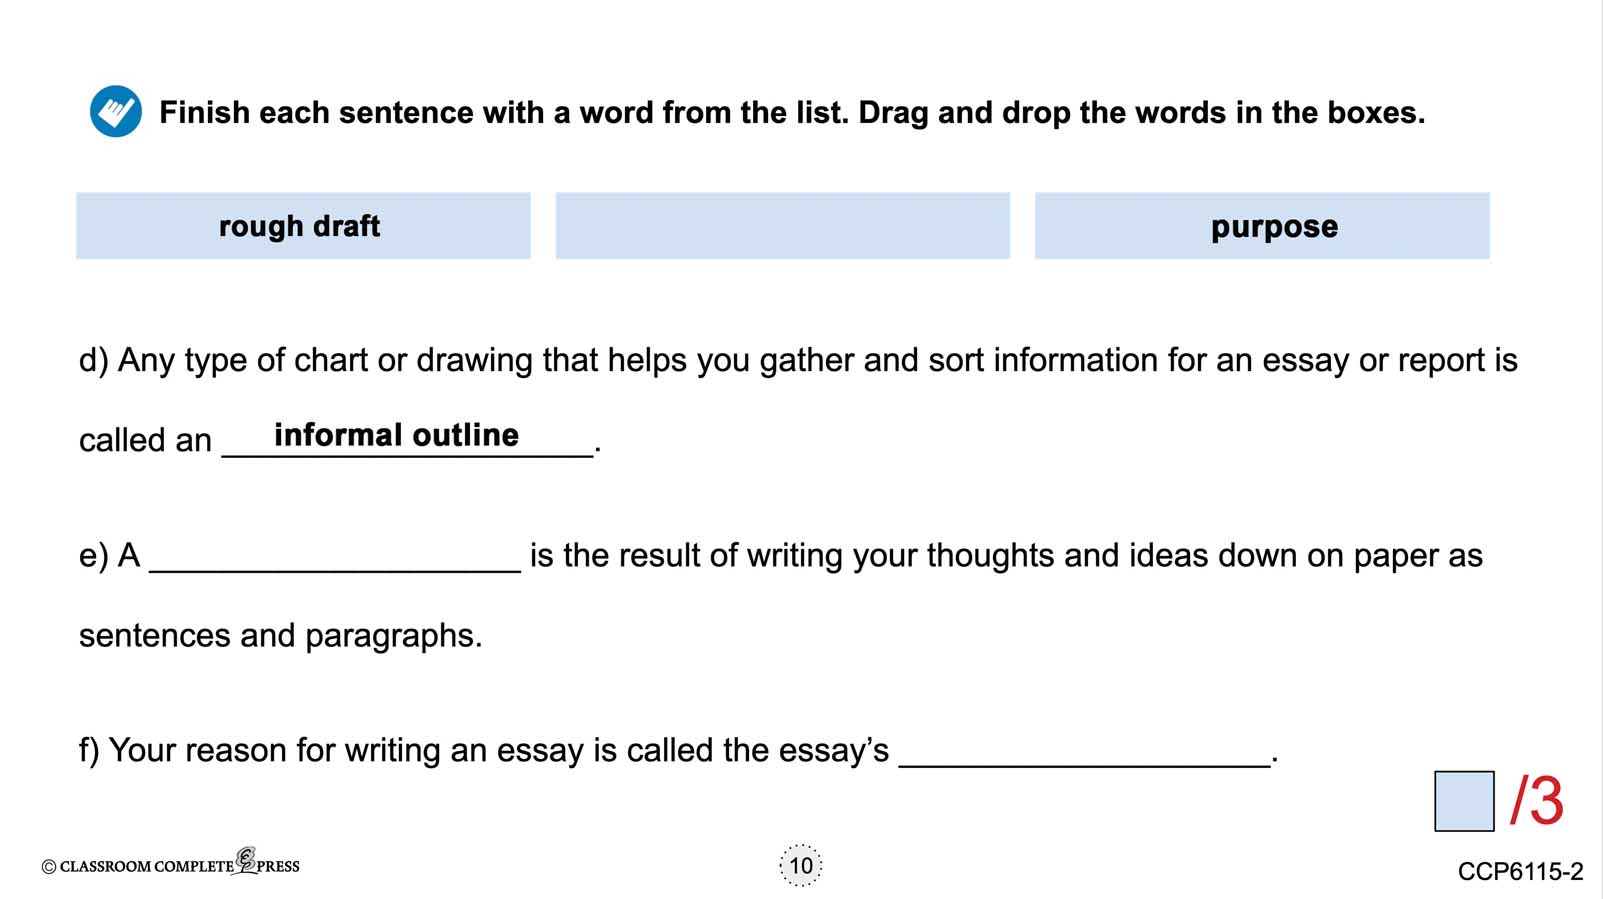 How to Write an Essay: Drafting and Graphic Organizers - Google Slides Gr. 5-8 - eBook